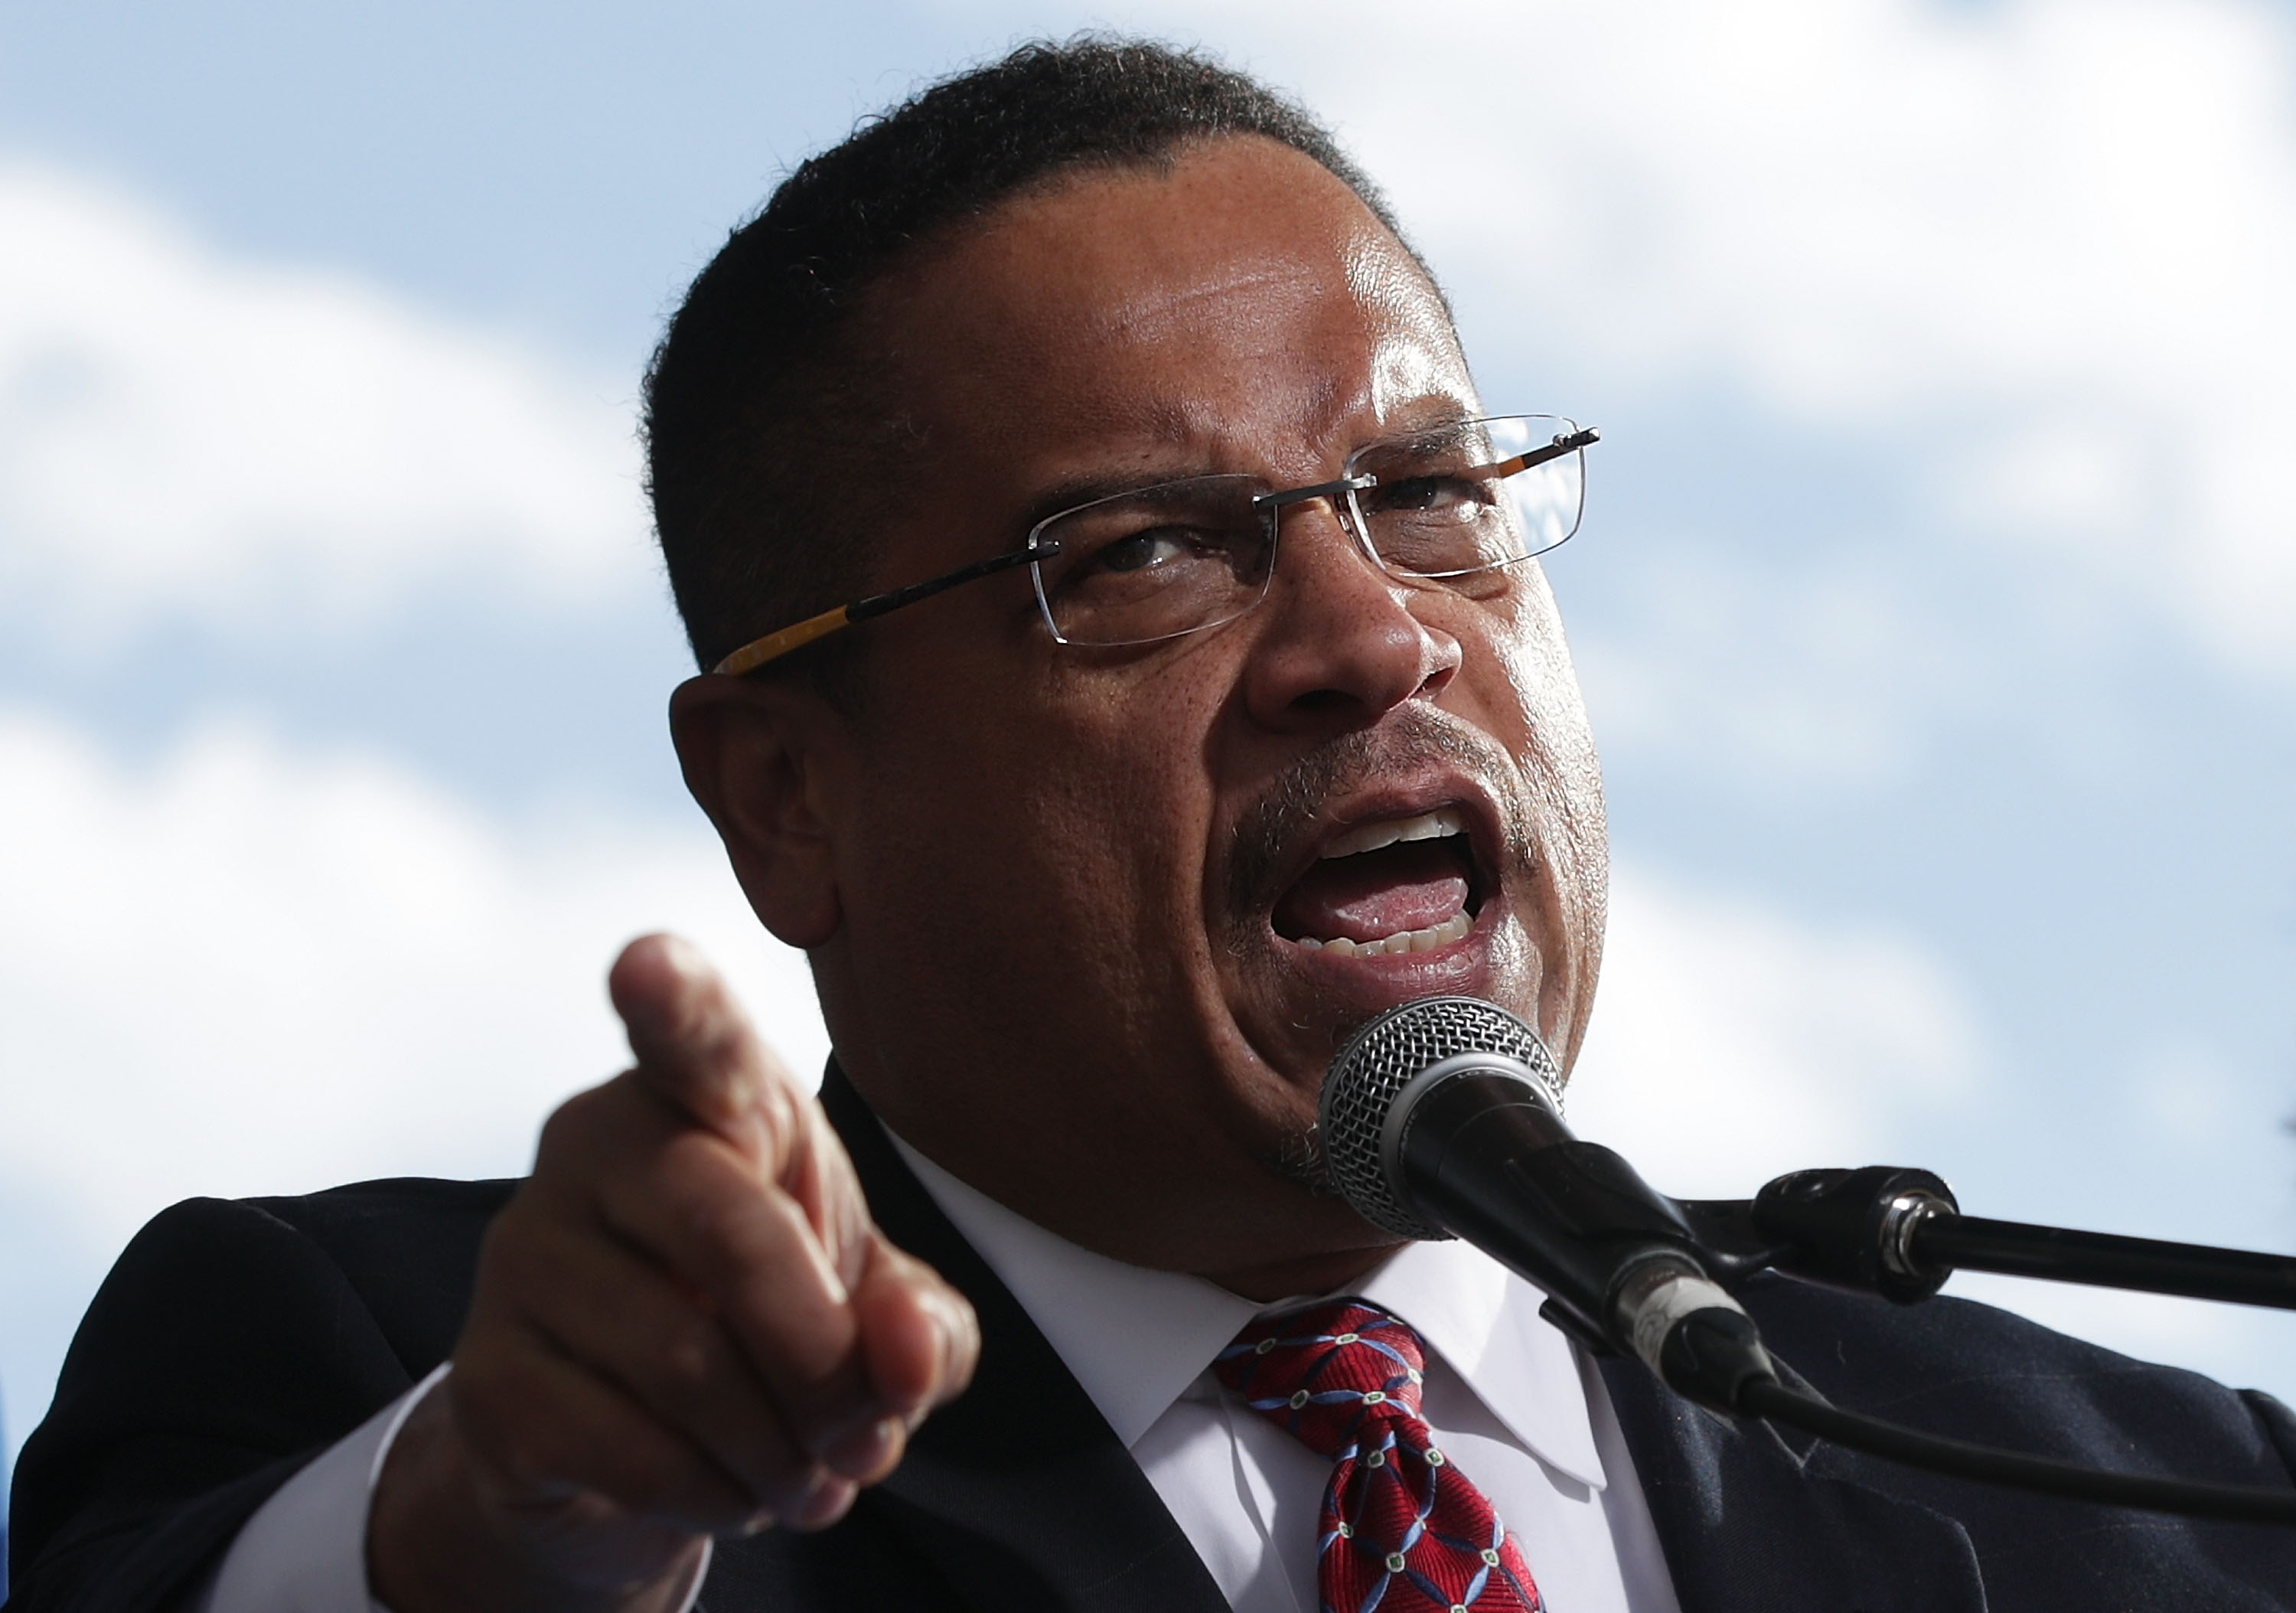 Keith Ellison is a risk the Democratic party needs.